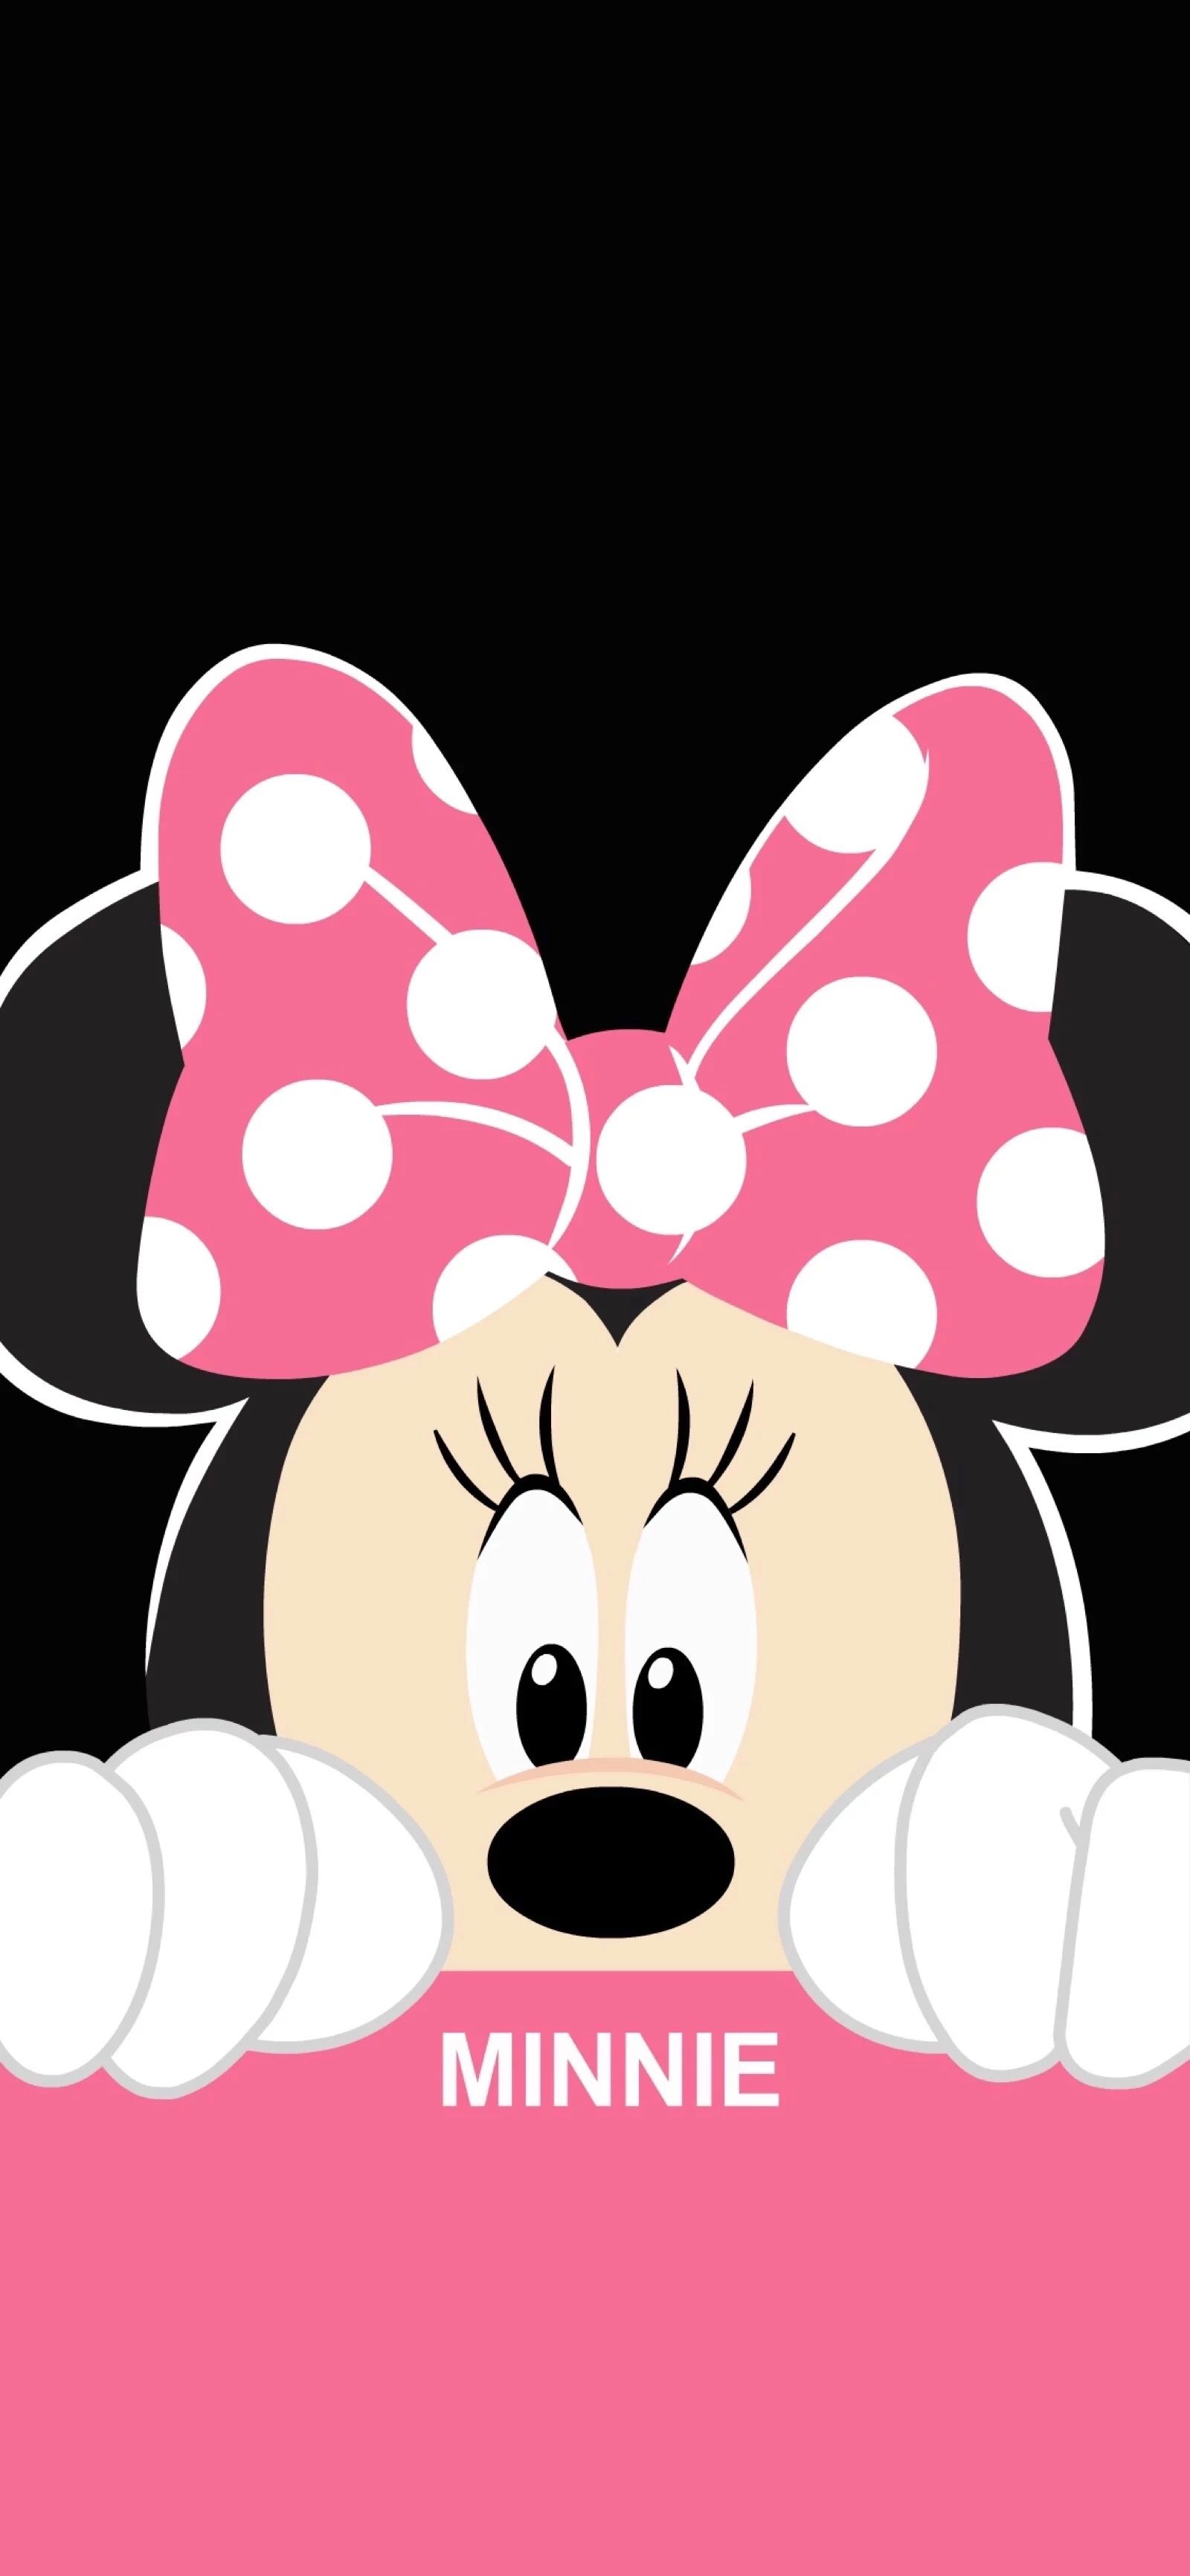 minnie mouse iphone wallpaper,pink,cartoon,clip art,snout,animation